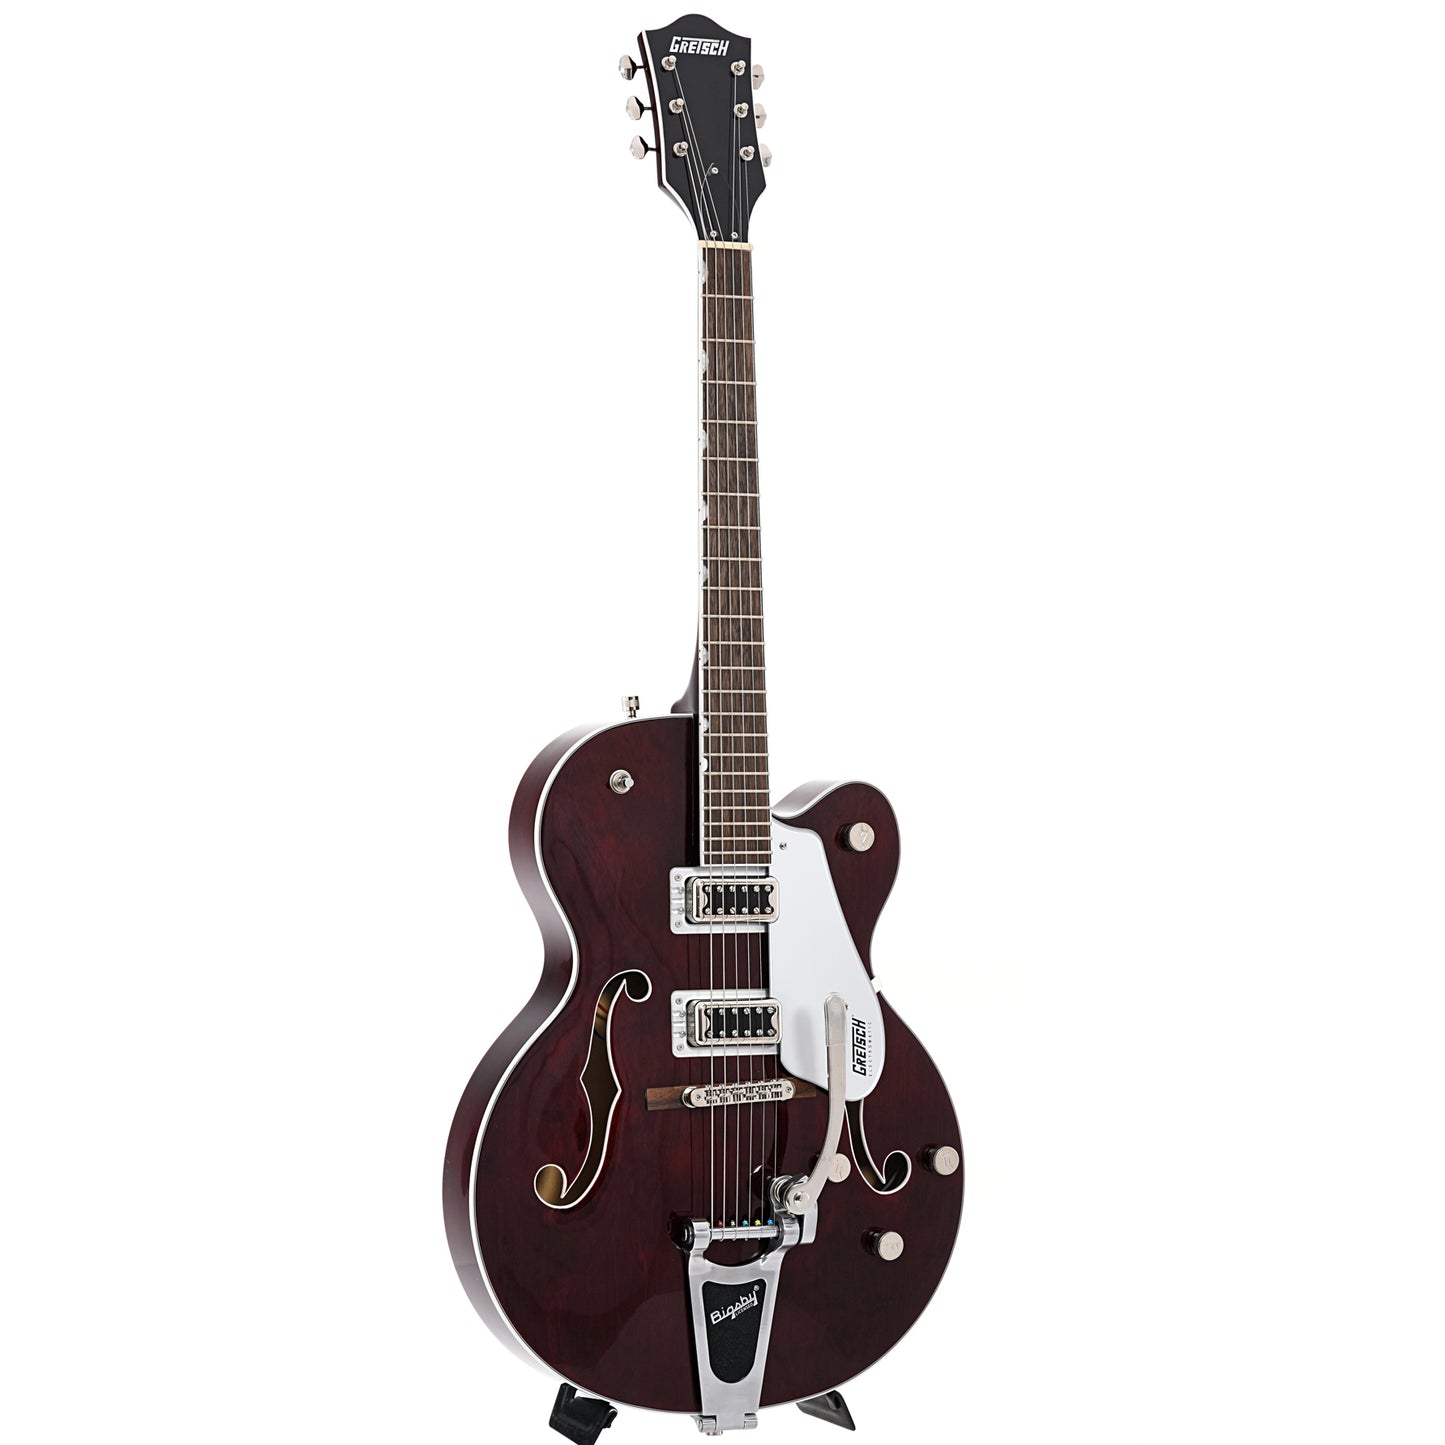 Image 11 of Gretsch G5420T Electromatic Classic Hollow Body Single Cut with Bigbsy, Walnut Stain- SKU# G5420T-WLNT : Product Type Hollow Body Electric Guitars : Elderly Instruments